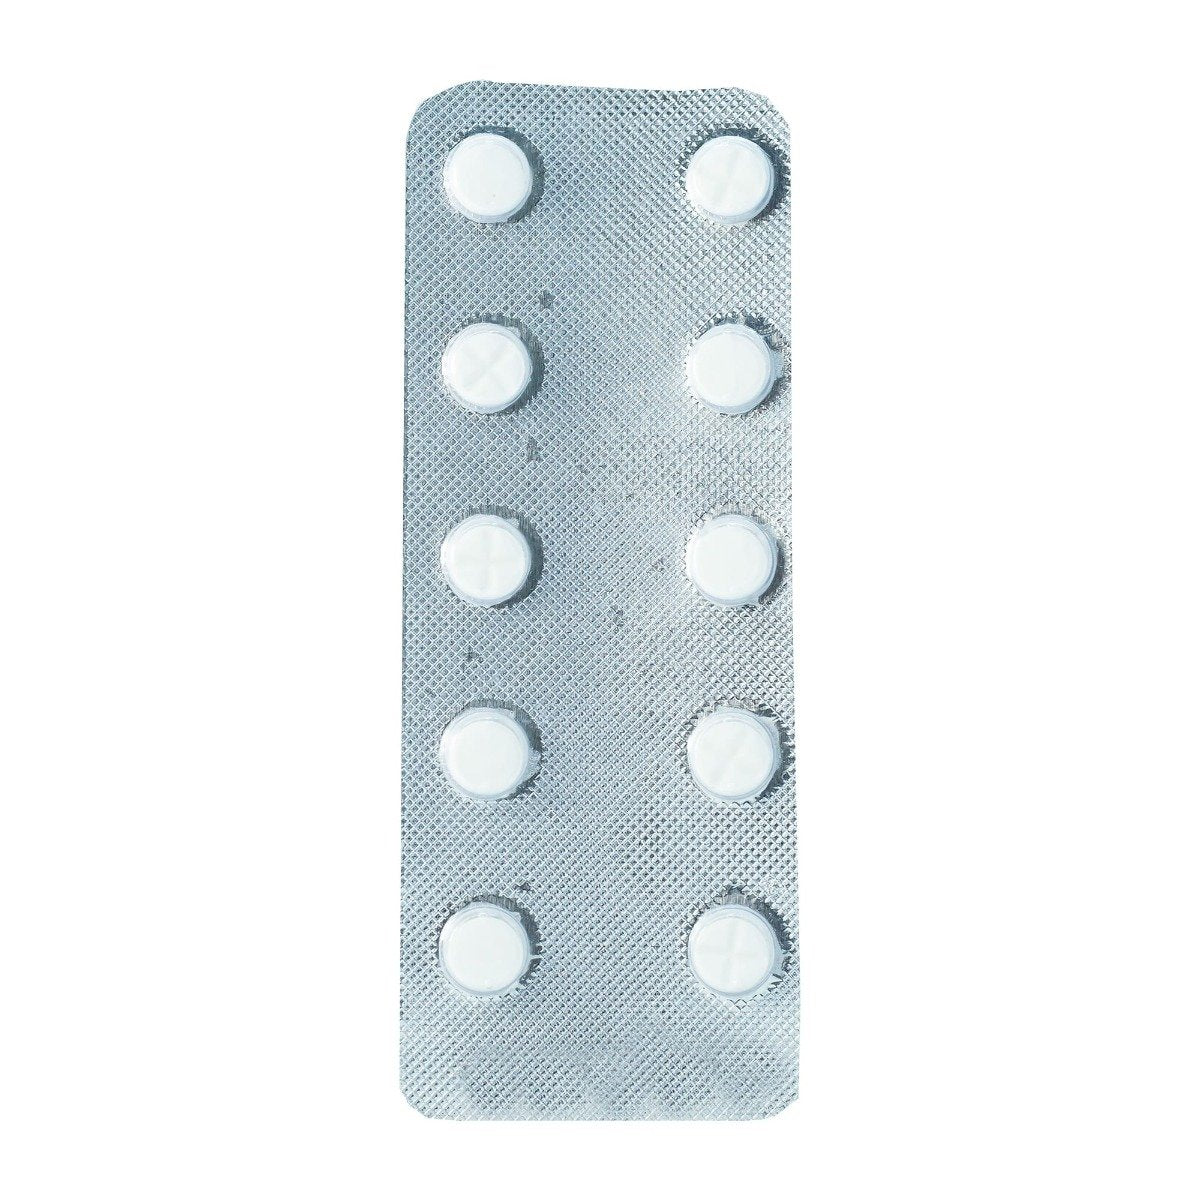 Cogintol 2 mg - 20 Tablets - Bloom Pharmacy